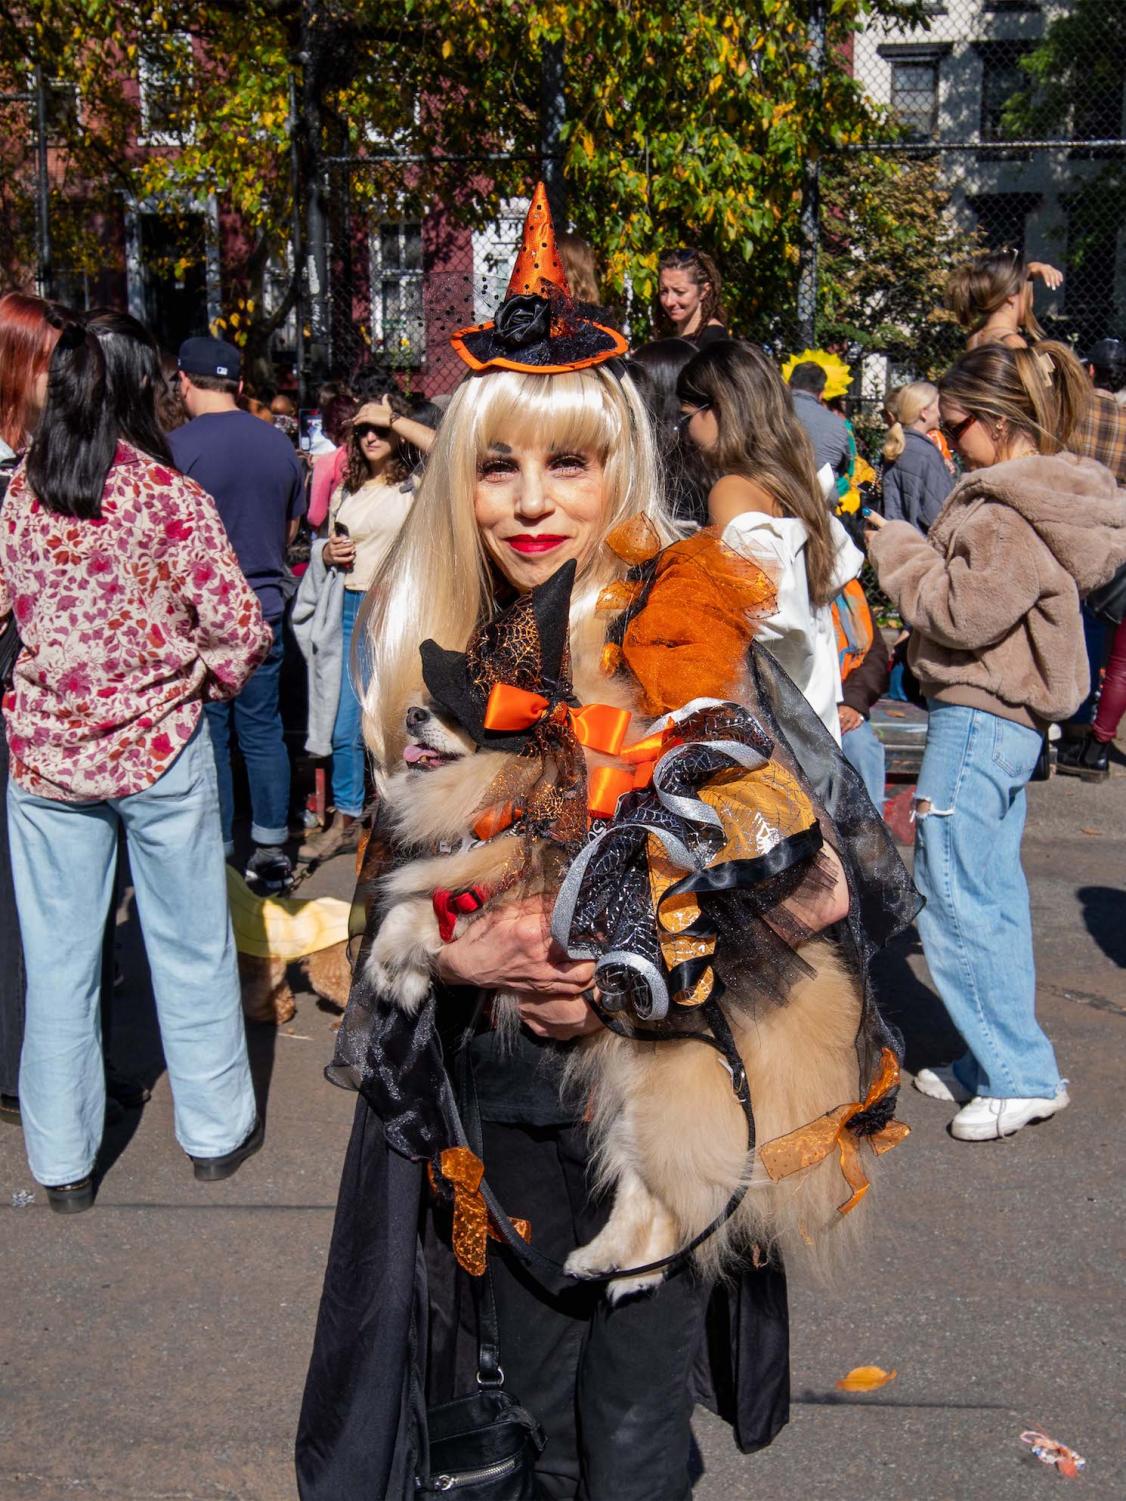 A dog owner wears an orange and black witch costume, and their dog wears a matching costume with a small witch hat, orange bow and black-and-orange tutu. A crowd of people stand in the background.